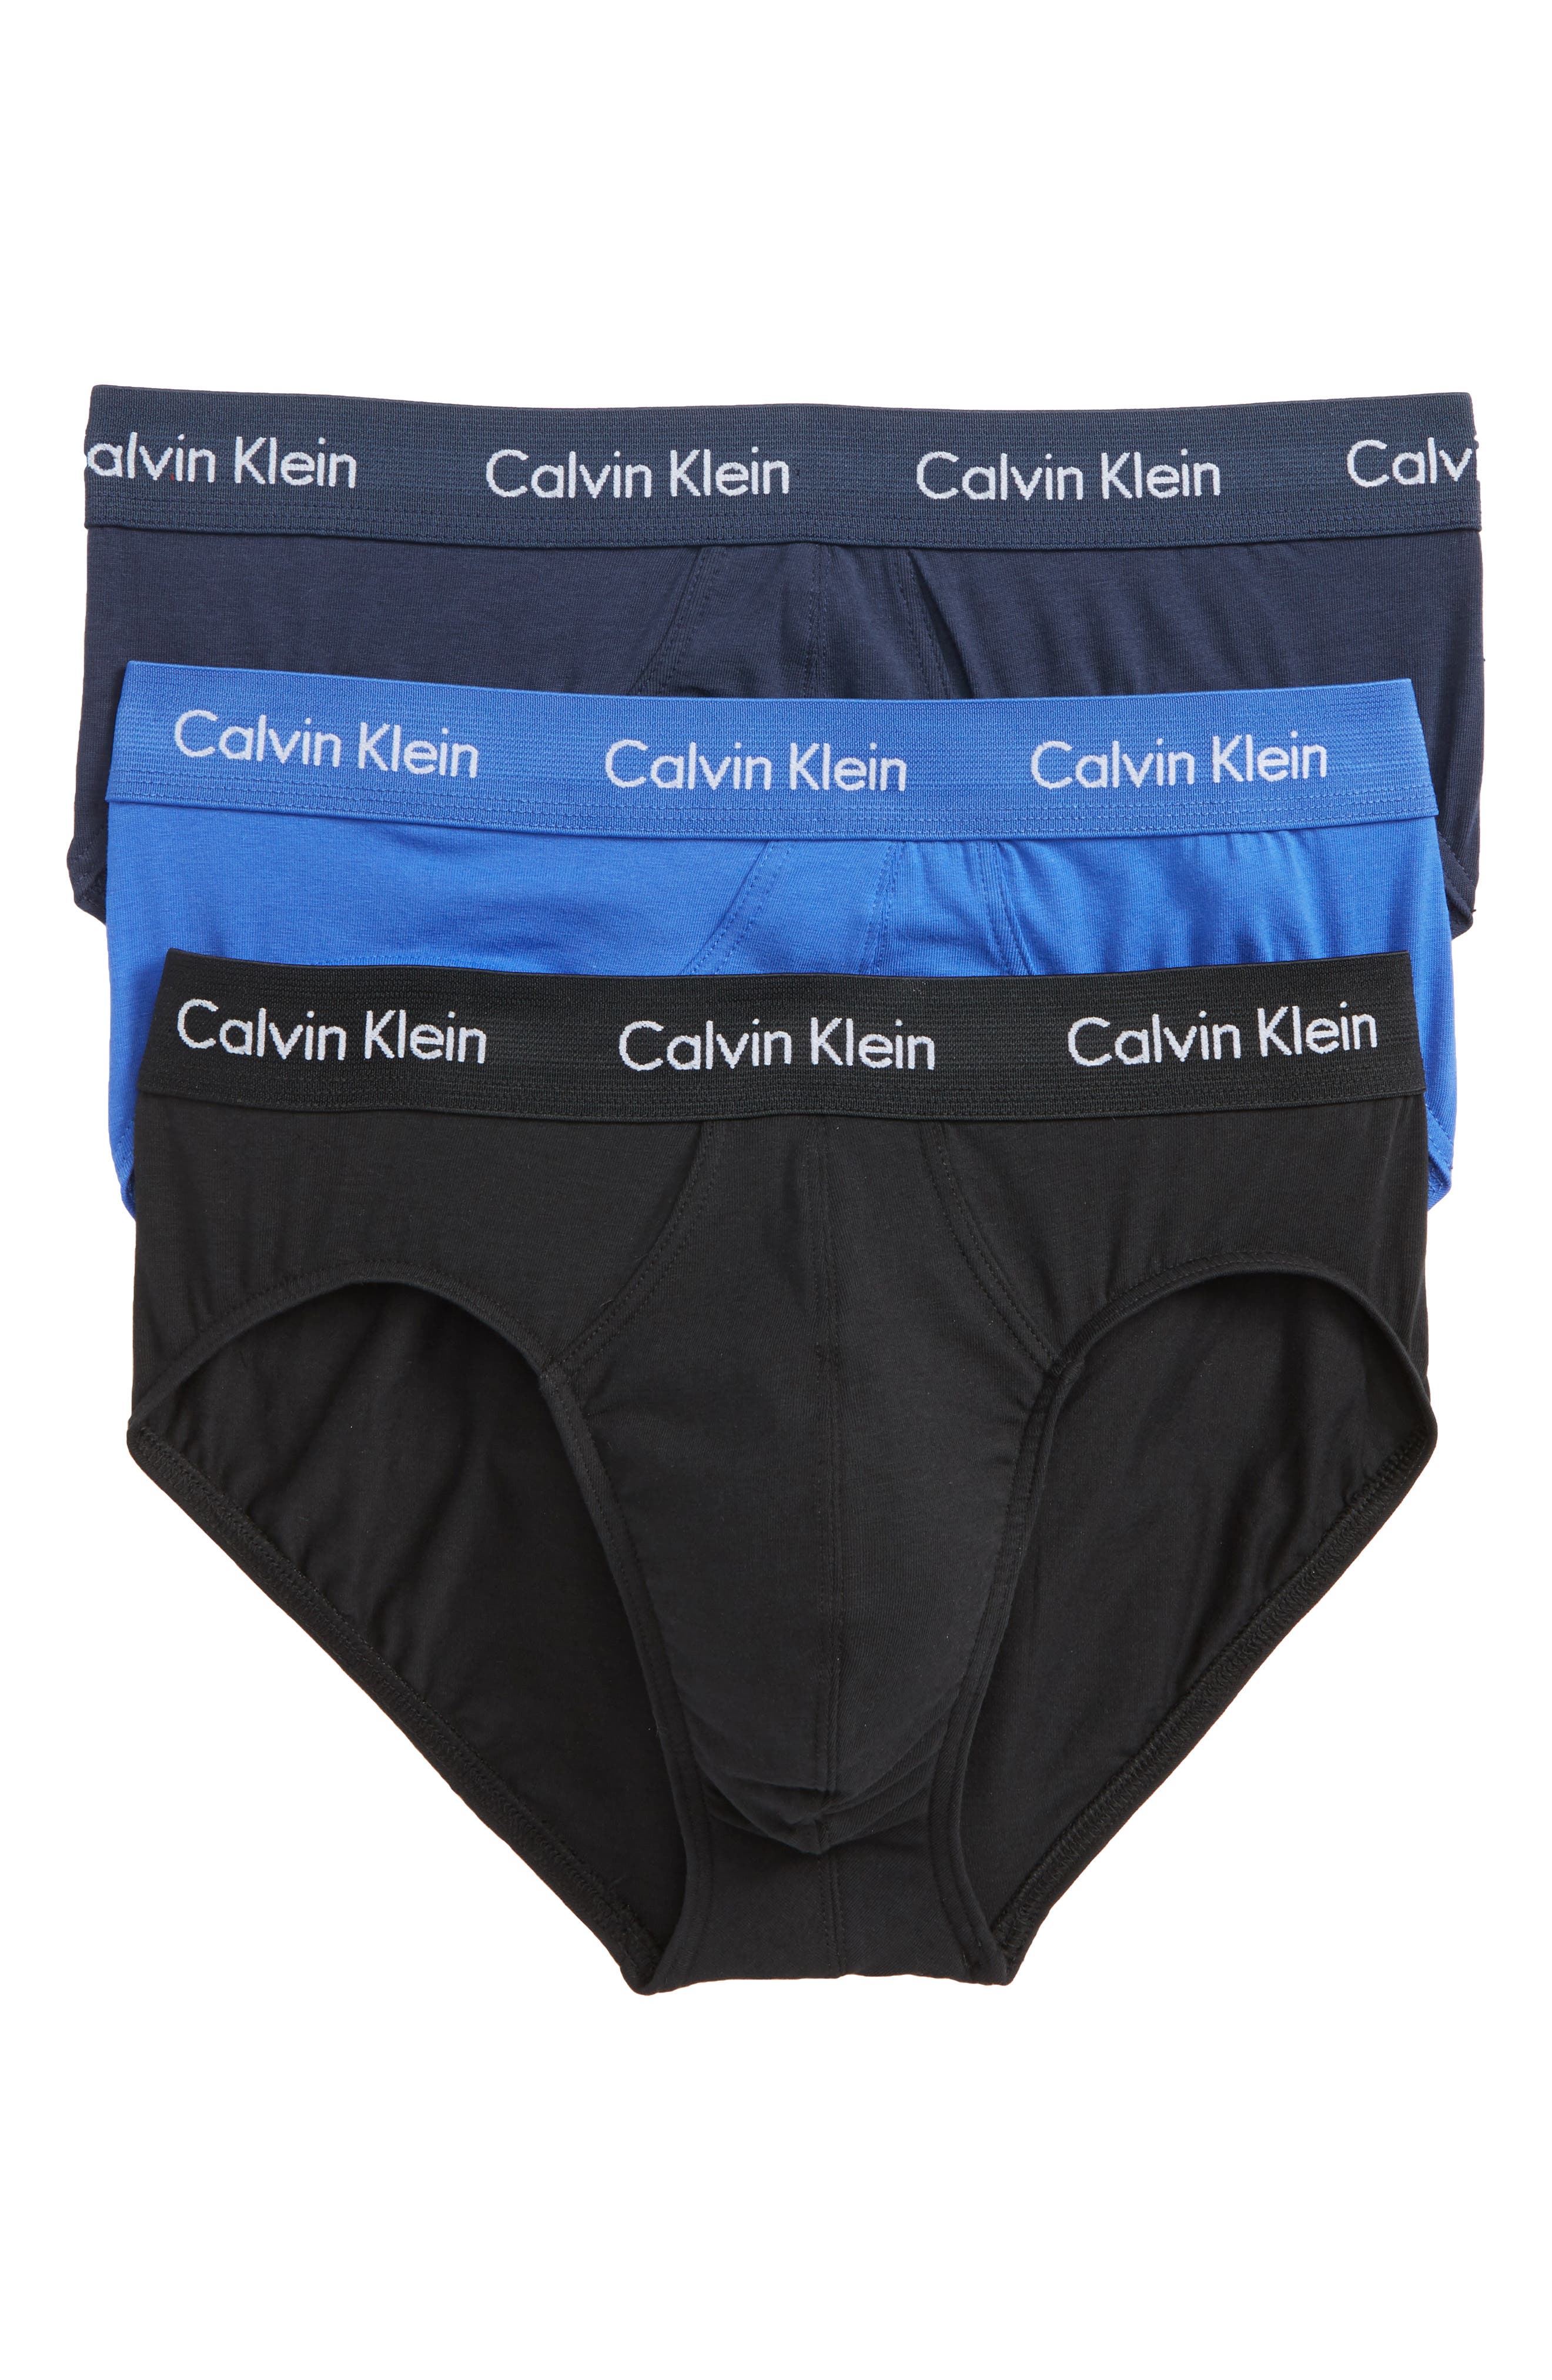 UPC 011531179851 product image for Men's Calvin Klein 3-Pack Hip Briefs, Size Small - Blue | upcitemdb.com